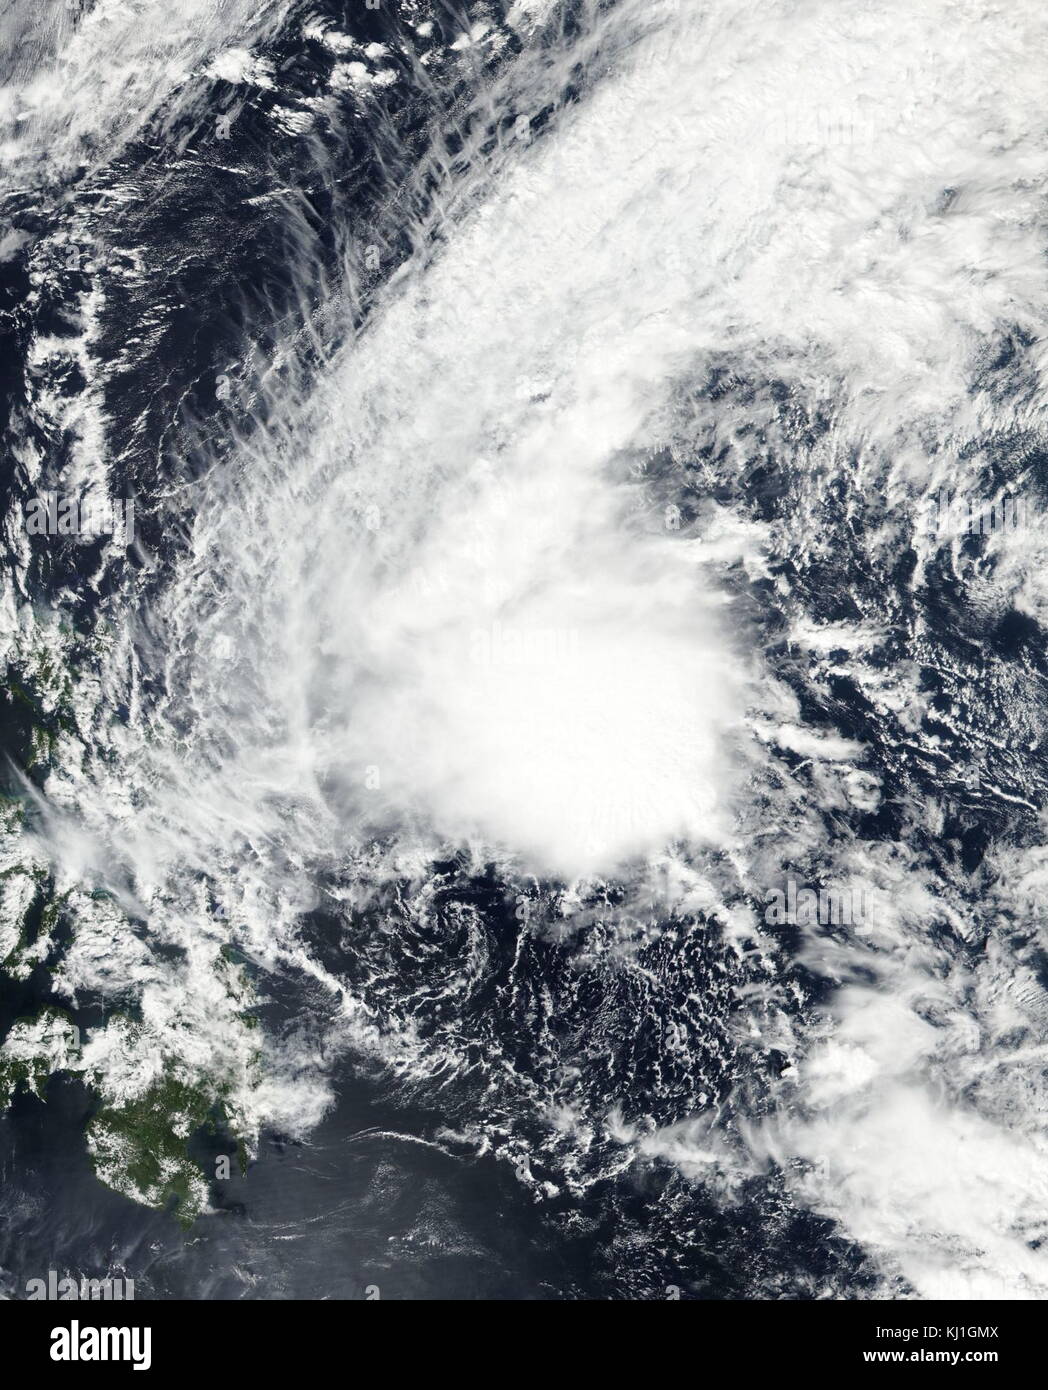 Tropical Depression Bising near peak strength east of Philippines on February 5, 2017. Early on February 12, PAGASA reported that a low-pressure area located about 140 km (87 mi) to the east of Surigao City in the Philippines had intensified into a tropical depression. During that day the depression gradually moved towards the west with its peak wind speeds estimated at 45 km/h (30 mph). Stock Photo